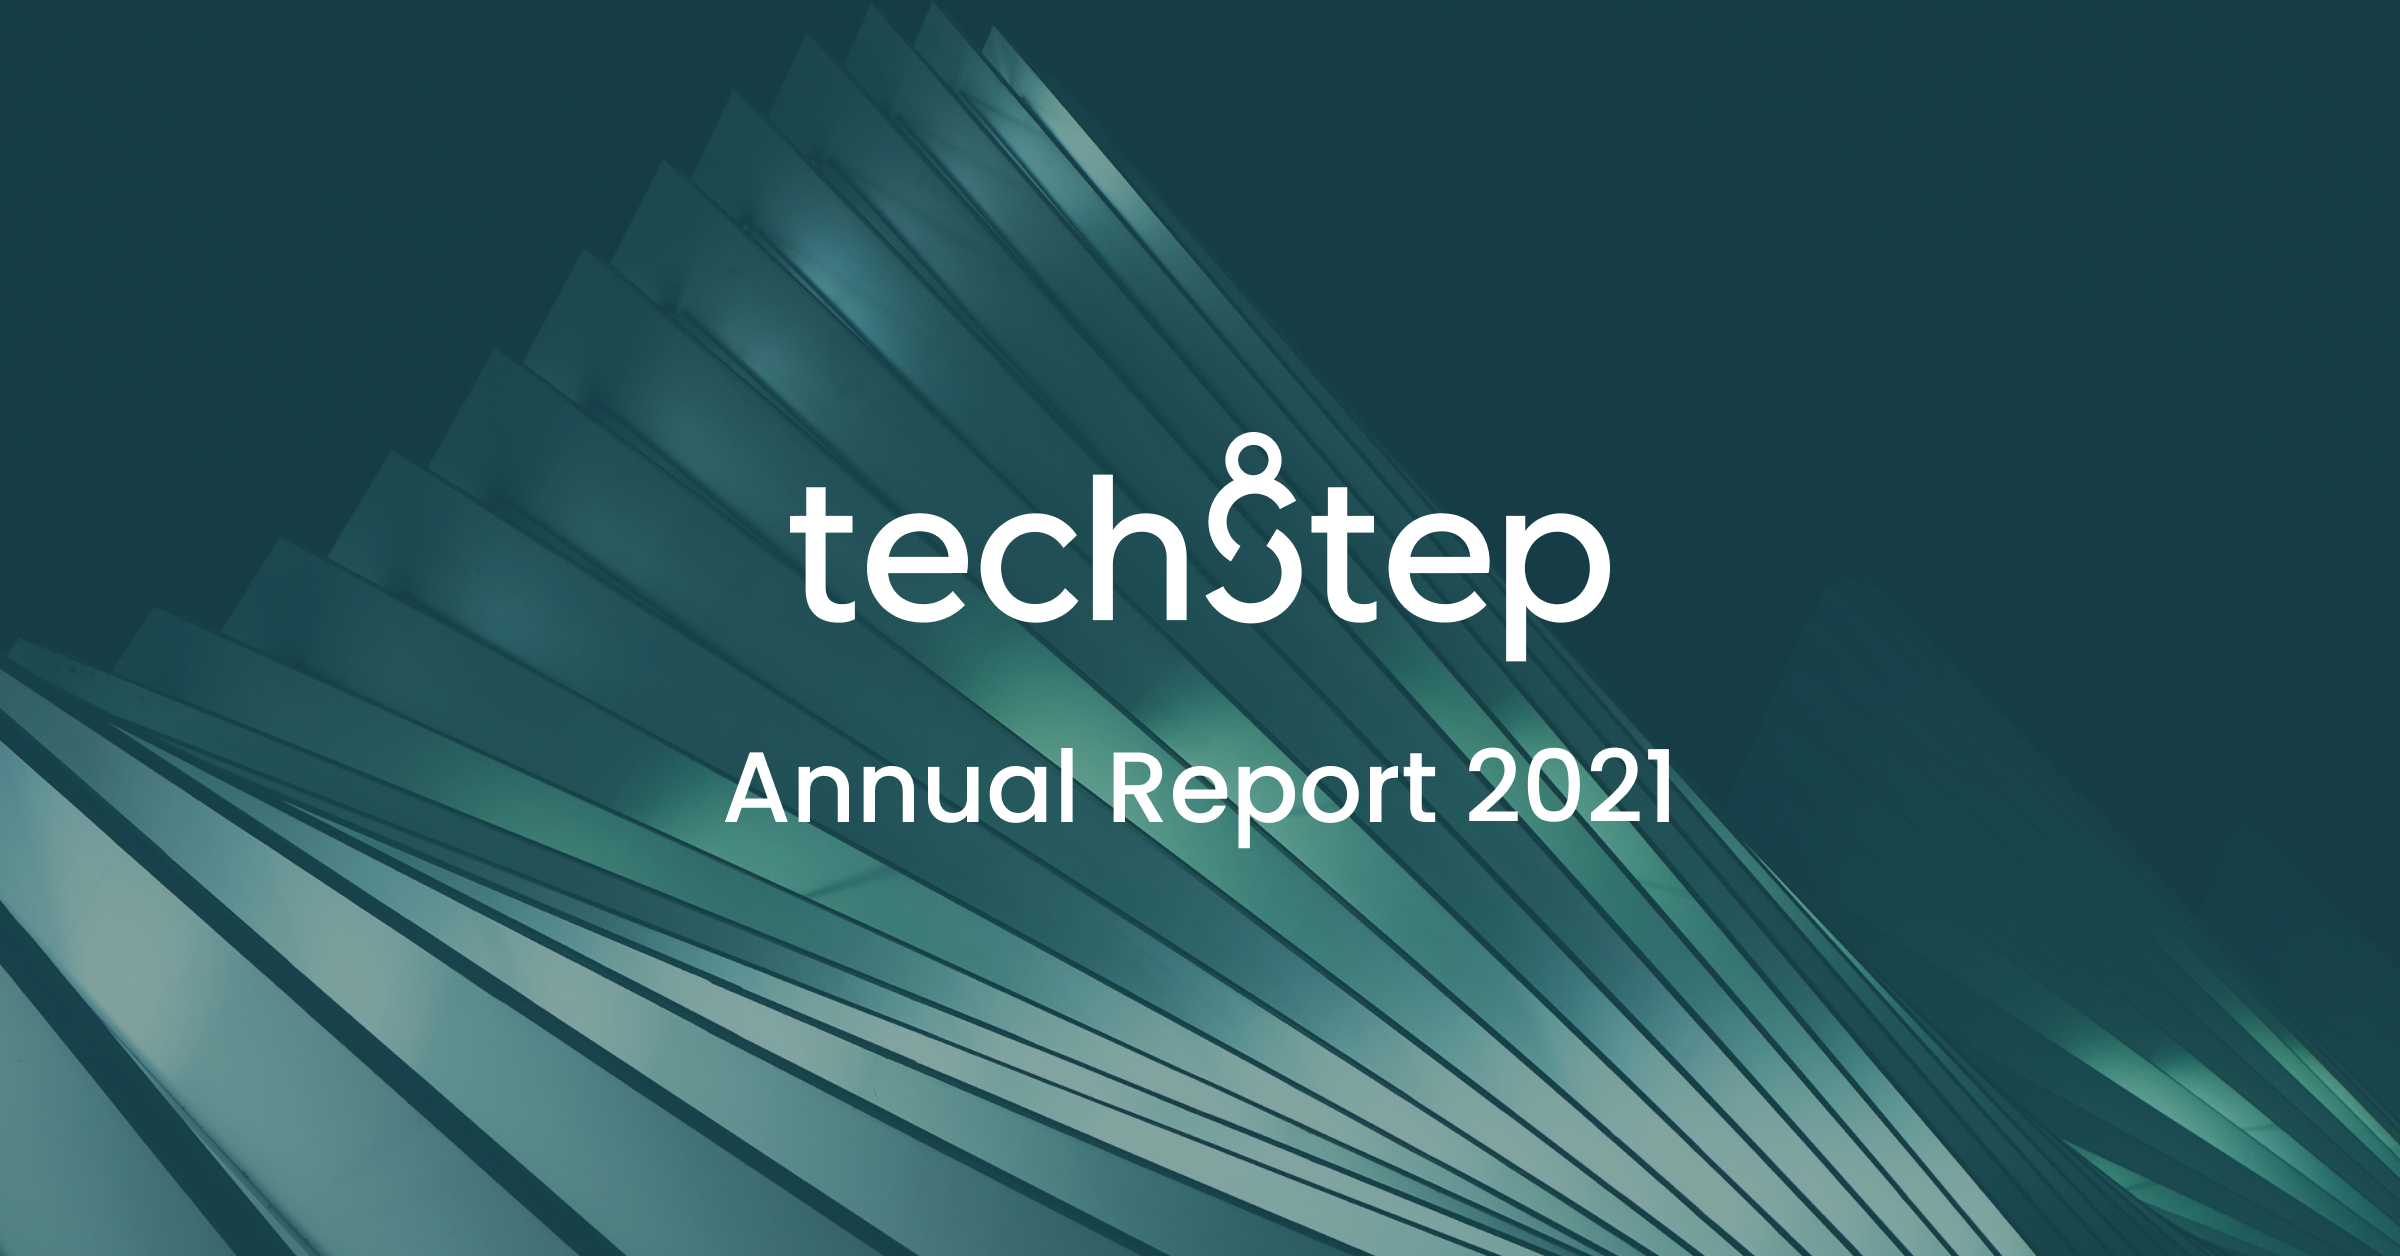 Techstep releases its annual report for 2021